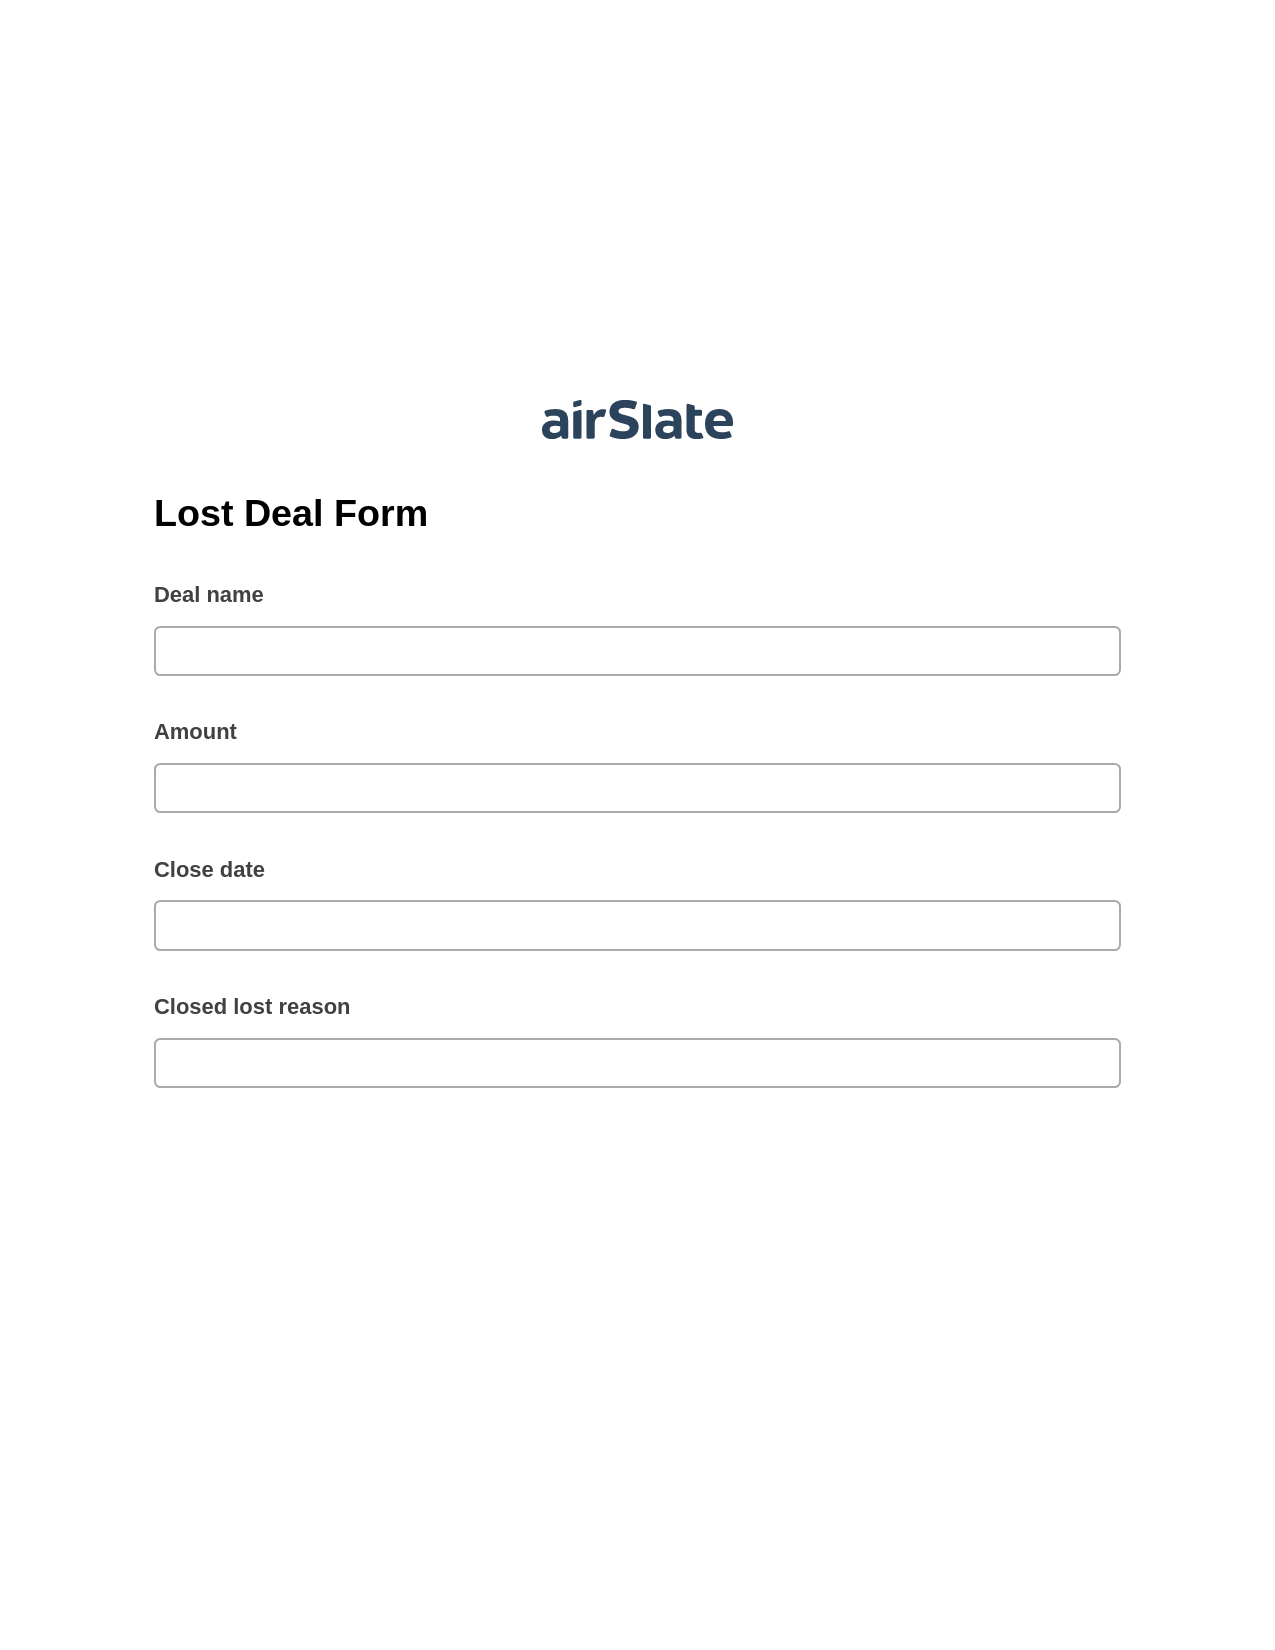 Lost Deal Form Pre-fill Document Bot, Hide Signatures Bot, Archive to OneDrive Bot